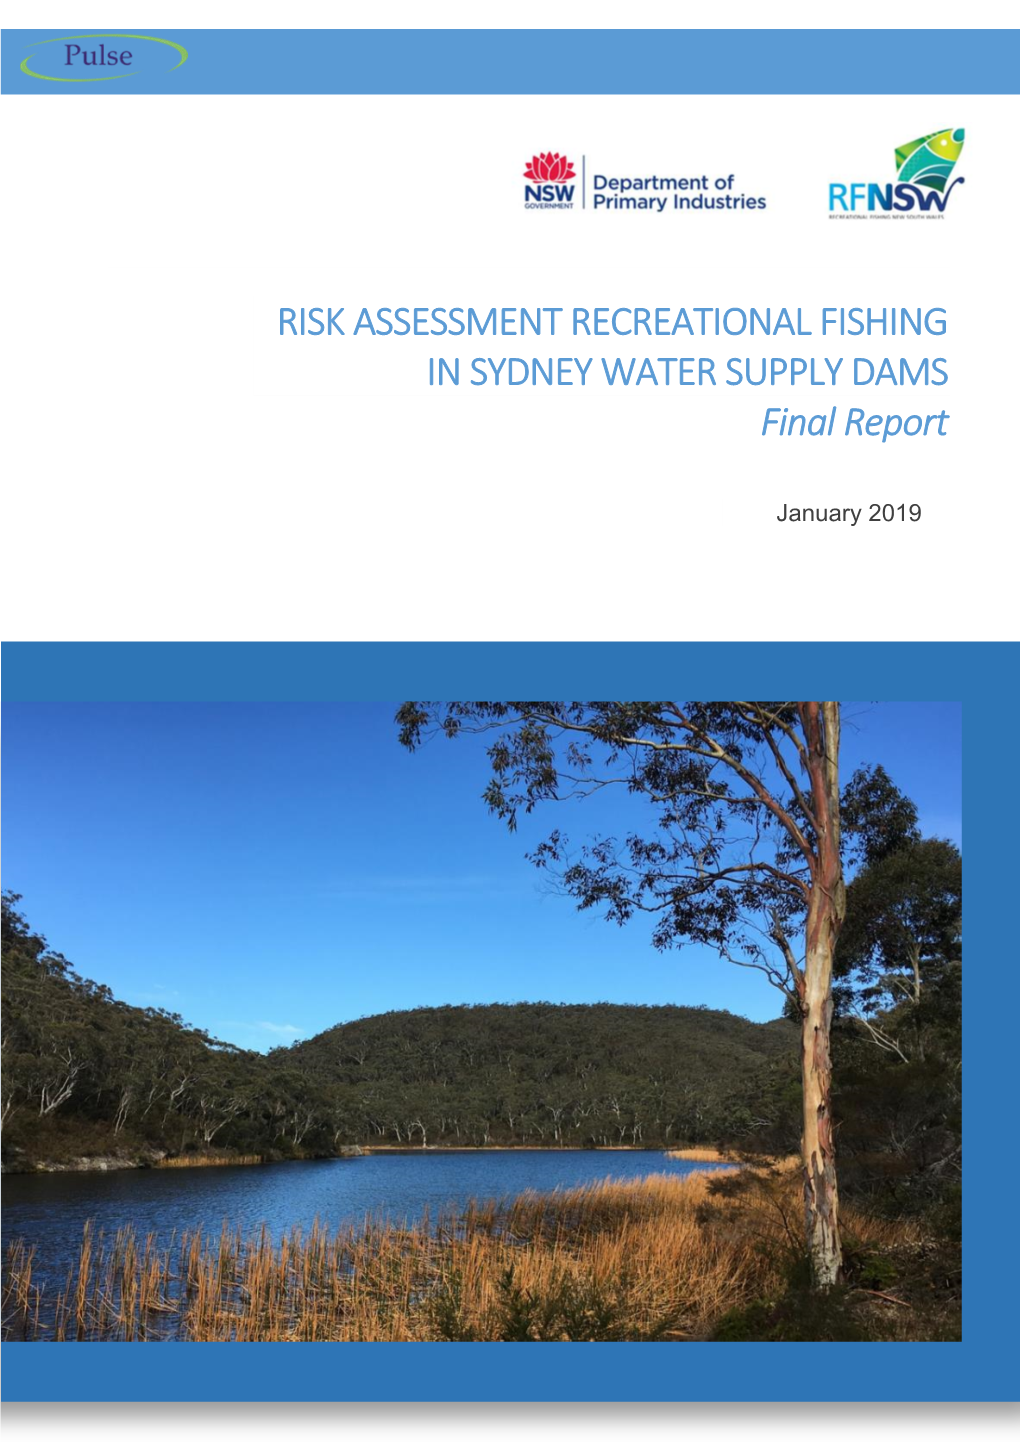 RISK ASSESSMENT RECREATIONAL FISHING in SYDNEY WATER SUPPLY DAMS Final Report